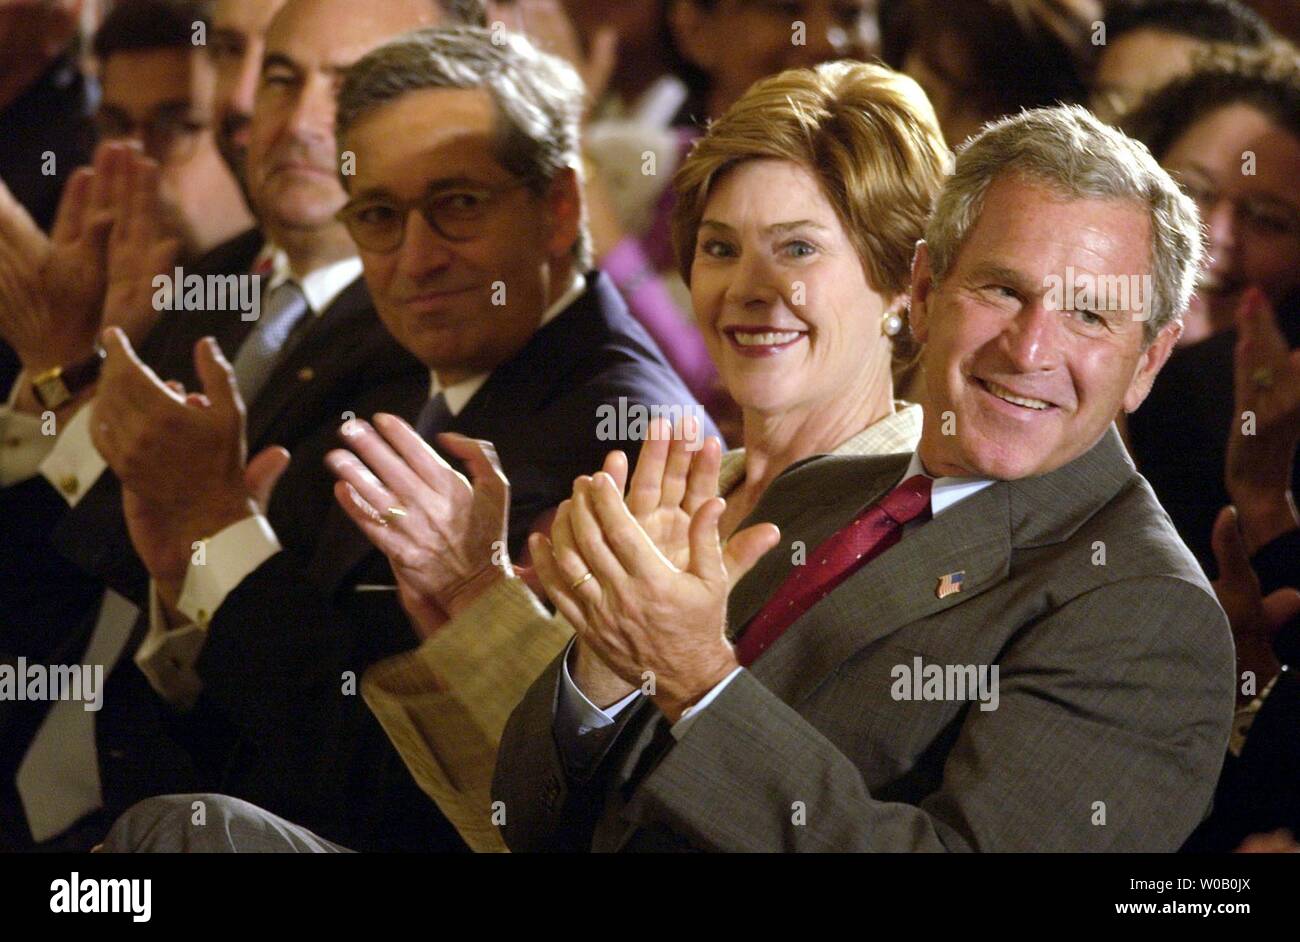 President George W. Bush participates in a Hispanic Heritage Month concert and reception in the East Room at the White House in Washington DC, Wednesday,  September 15, 2004. ( Mary F. Calvert / The Washington Times ) Stock Photo